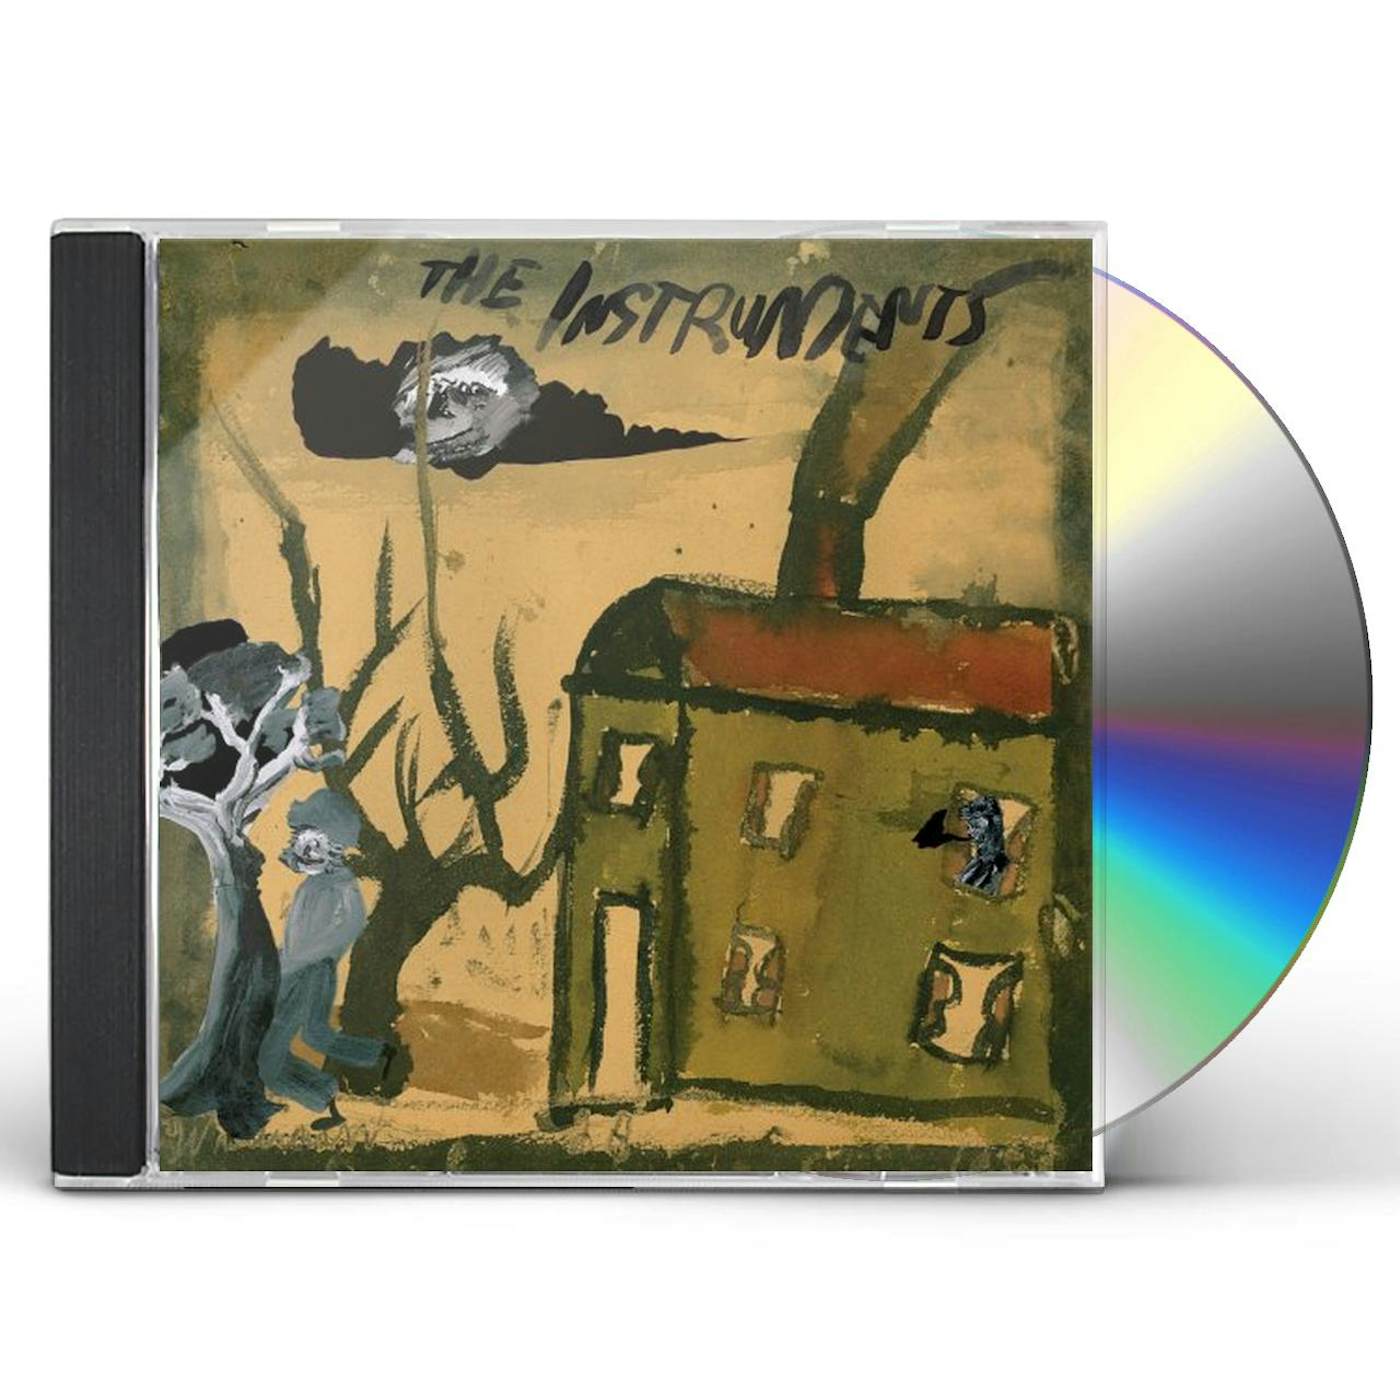 The Instruments CAST A HALF SHADOW CD